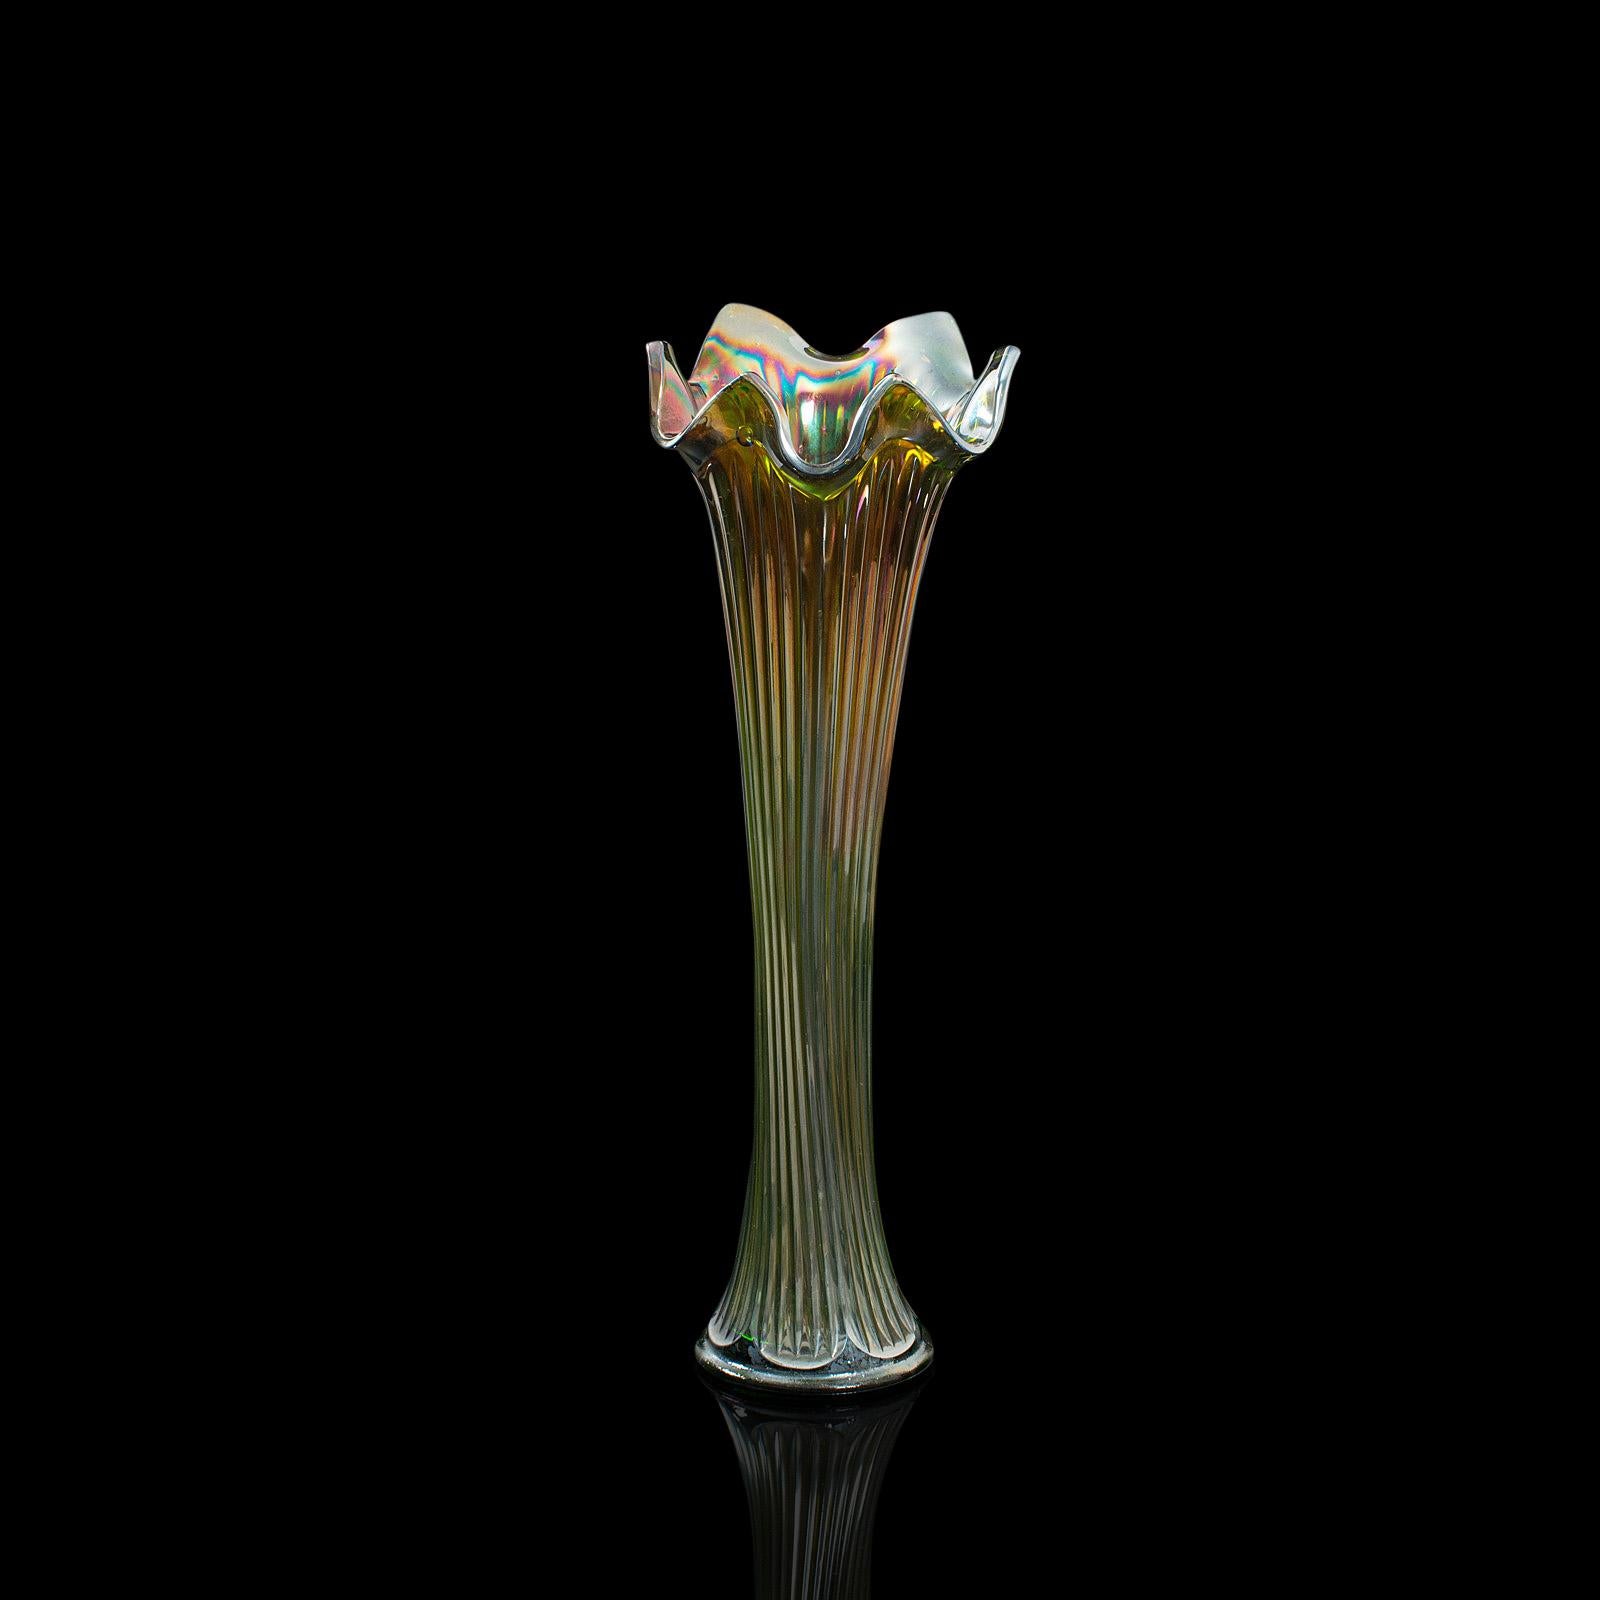 This is a tall vintage flower vase. An English, decorative glass carnival vase, dating to the early 20th century, circa 1930.

Desirably fluted, colorful flower vase
Displaying a desirable aged patina and in very good order
Green glass with